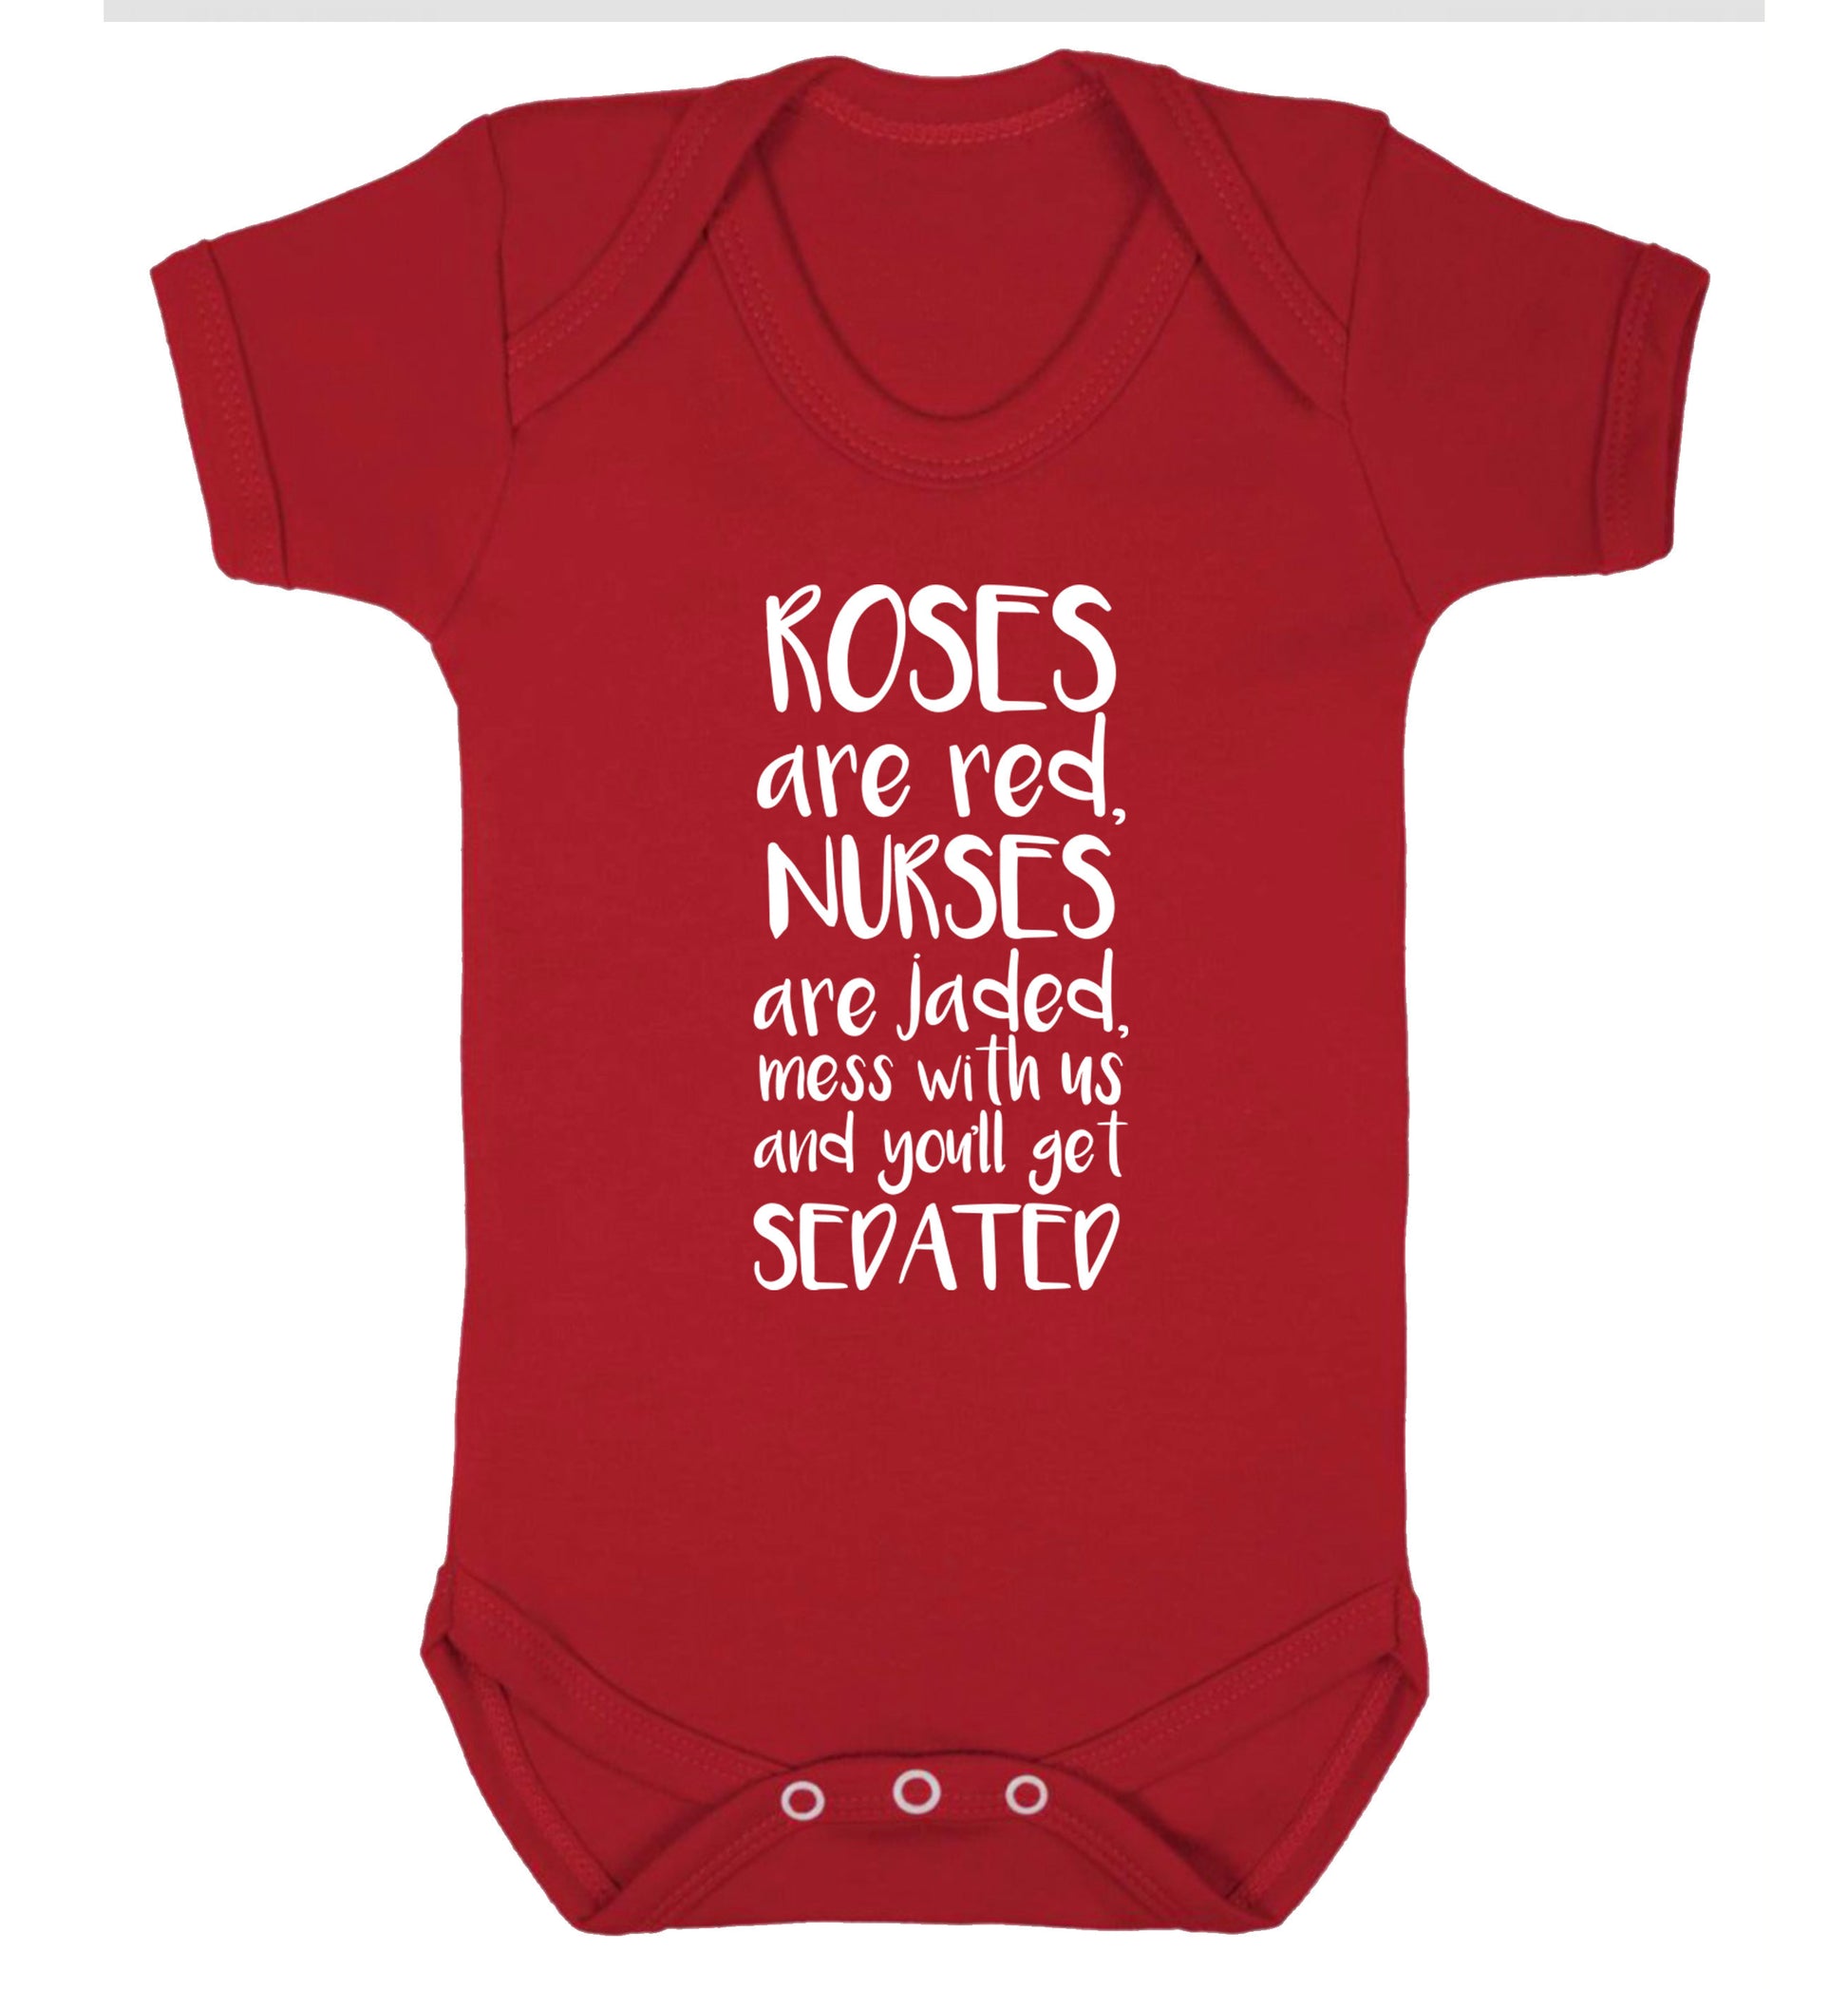 Roses are red, nurses are jaded, mess with us and you'll get sedated Baby Vest red 18-24 months